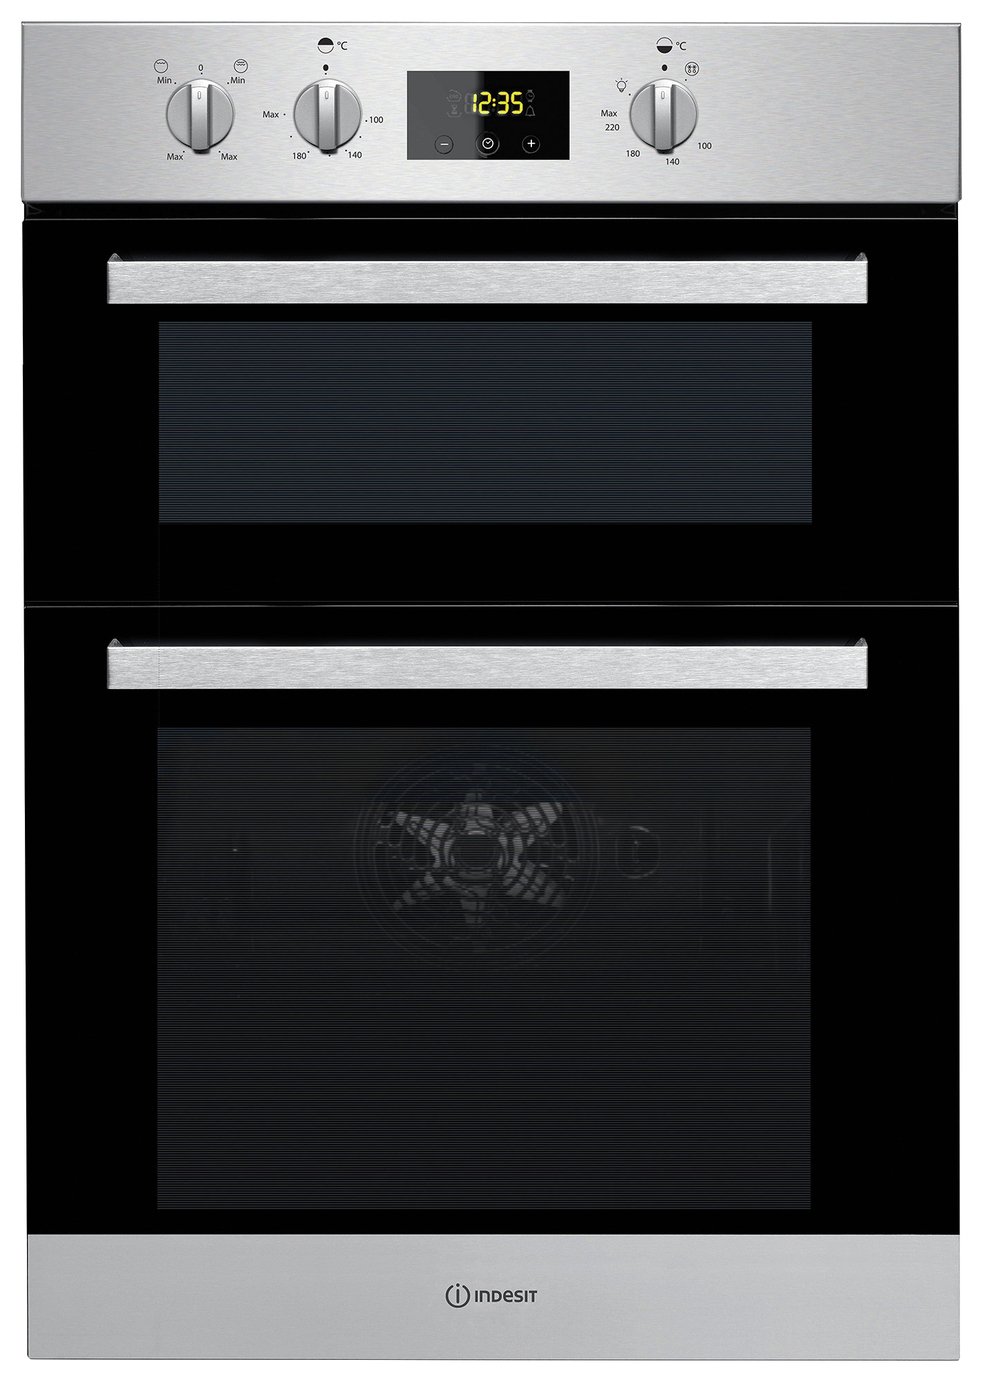 Indesit IDD6340IX Double Oven review